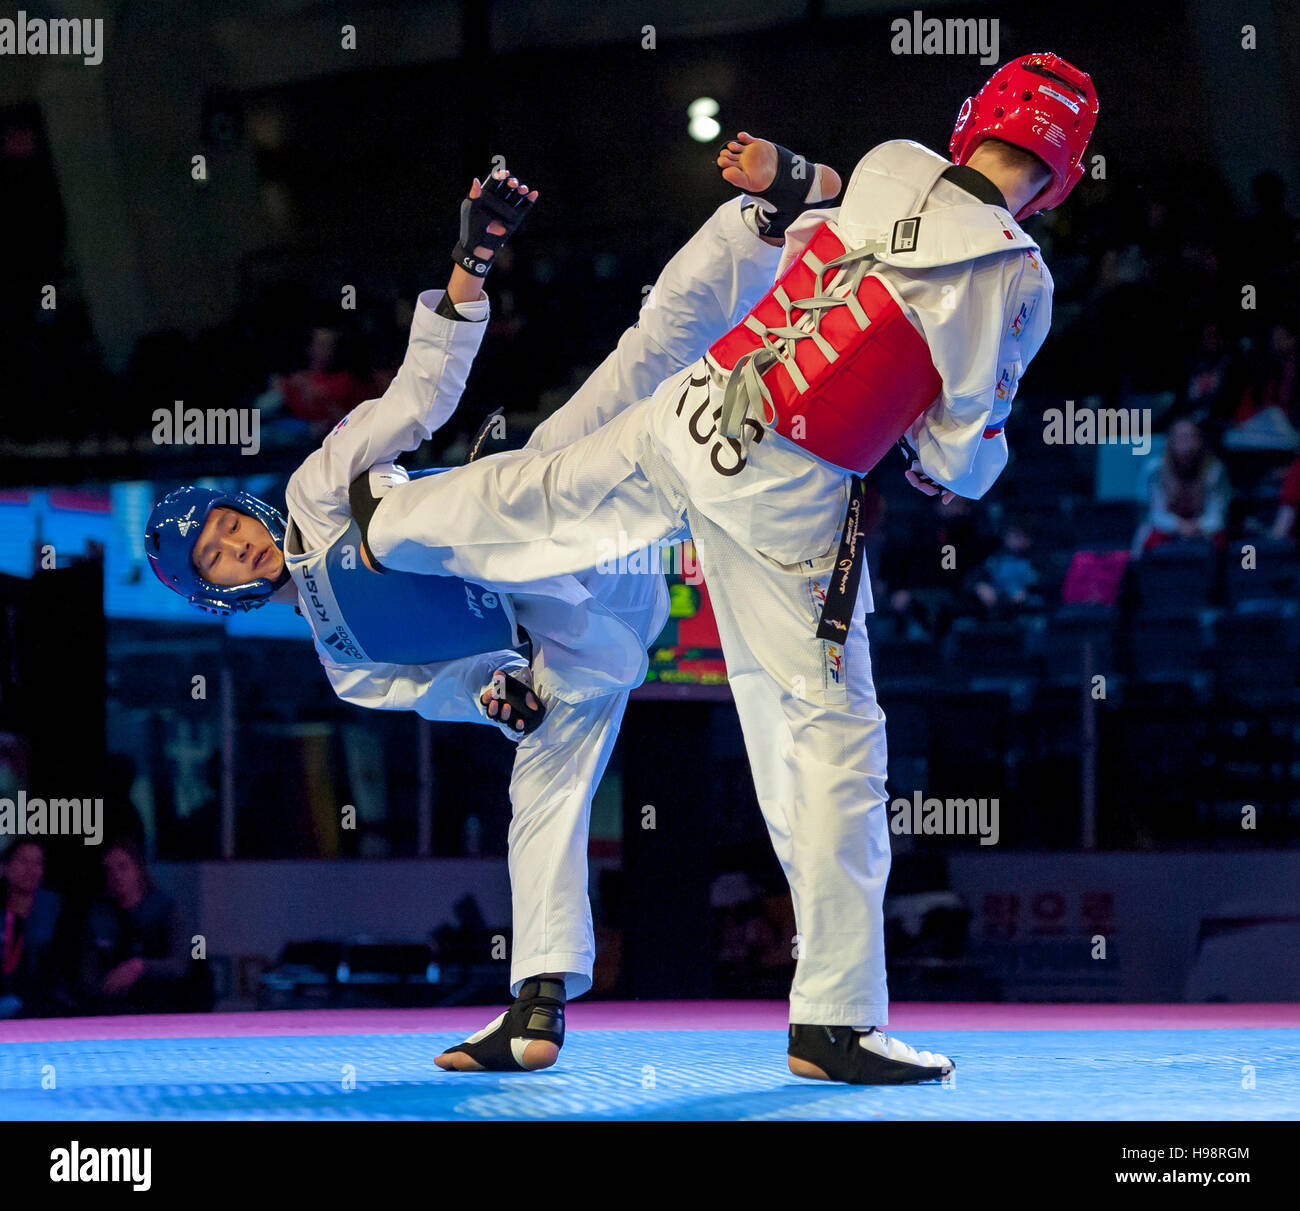 Burnaby, Canada. 19 November, 2016. WTF World Taekwondo Junior Championships Seung-Min Lee (KOR) and Sergey KArnuta (RUS) red compete in the final of male 73kg won by Lee. Alamy Live News/Peter Llewellyn Stock Photo